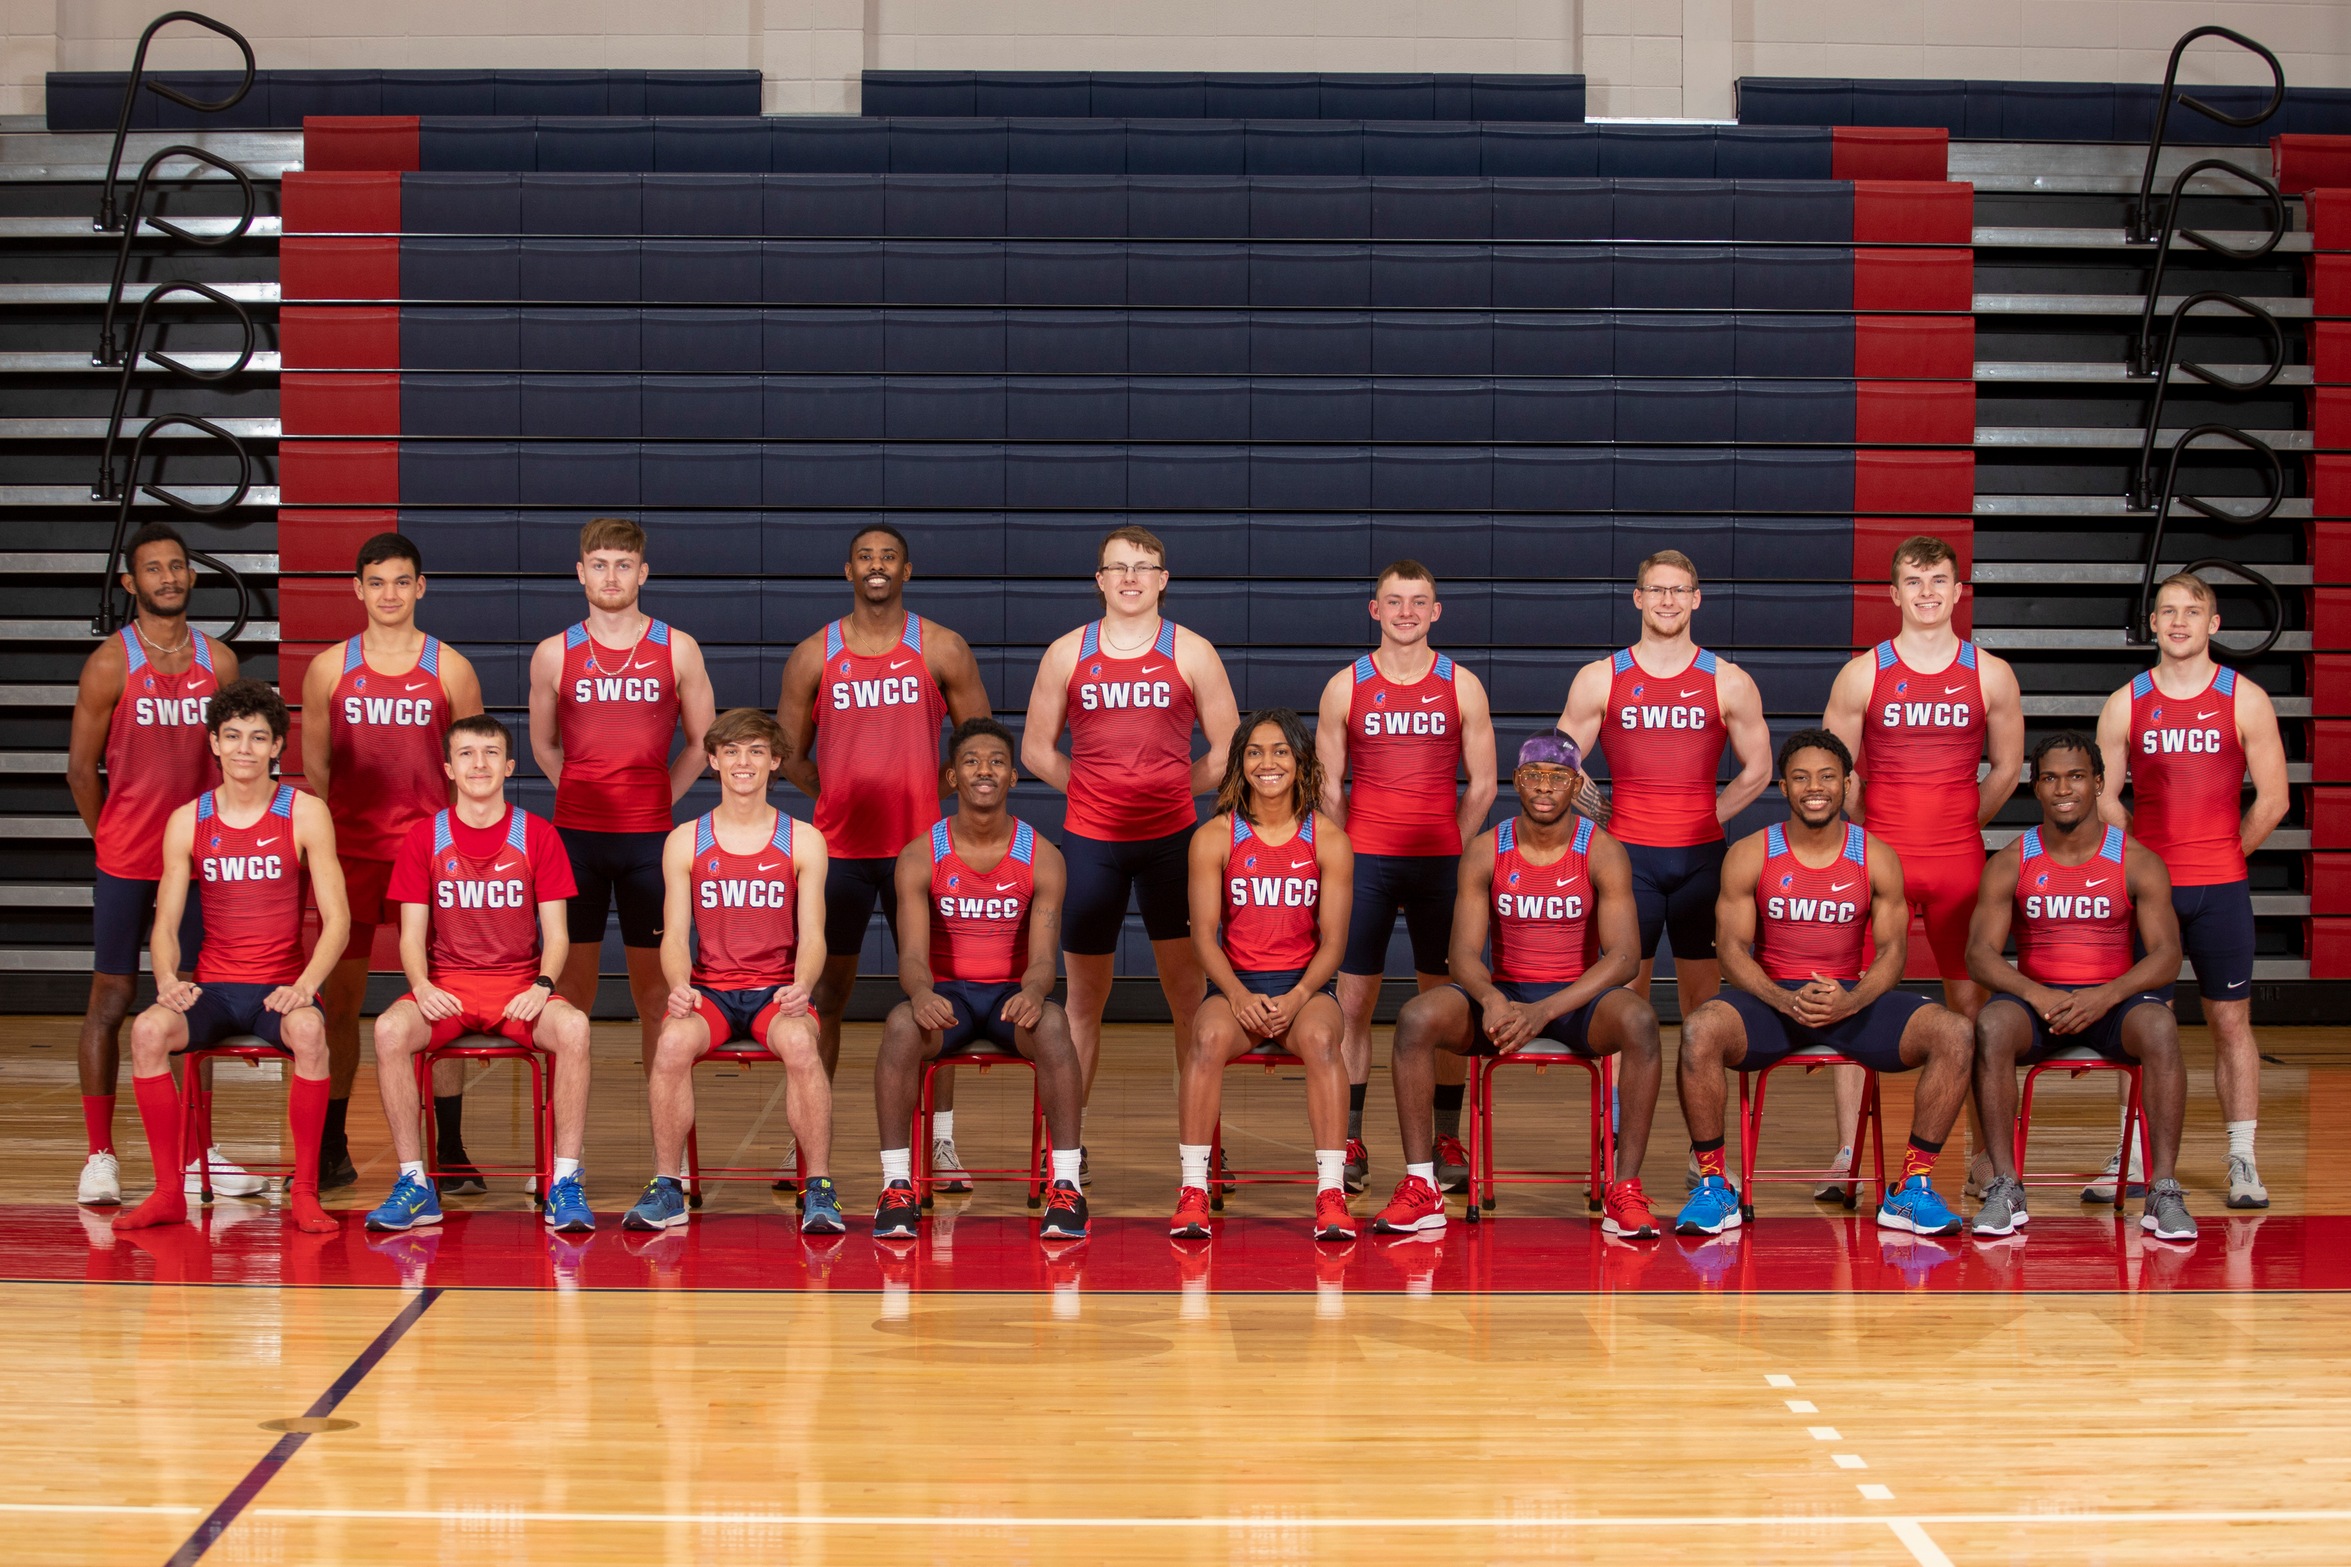 2020-21 Southwestern track and field team